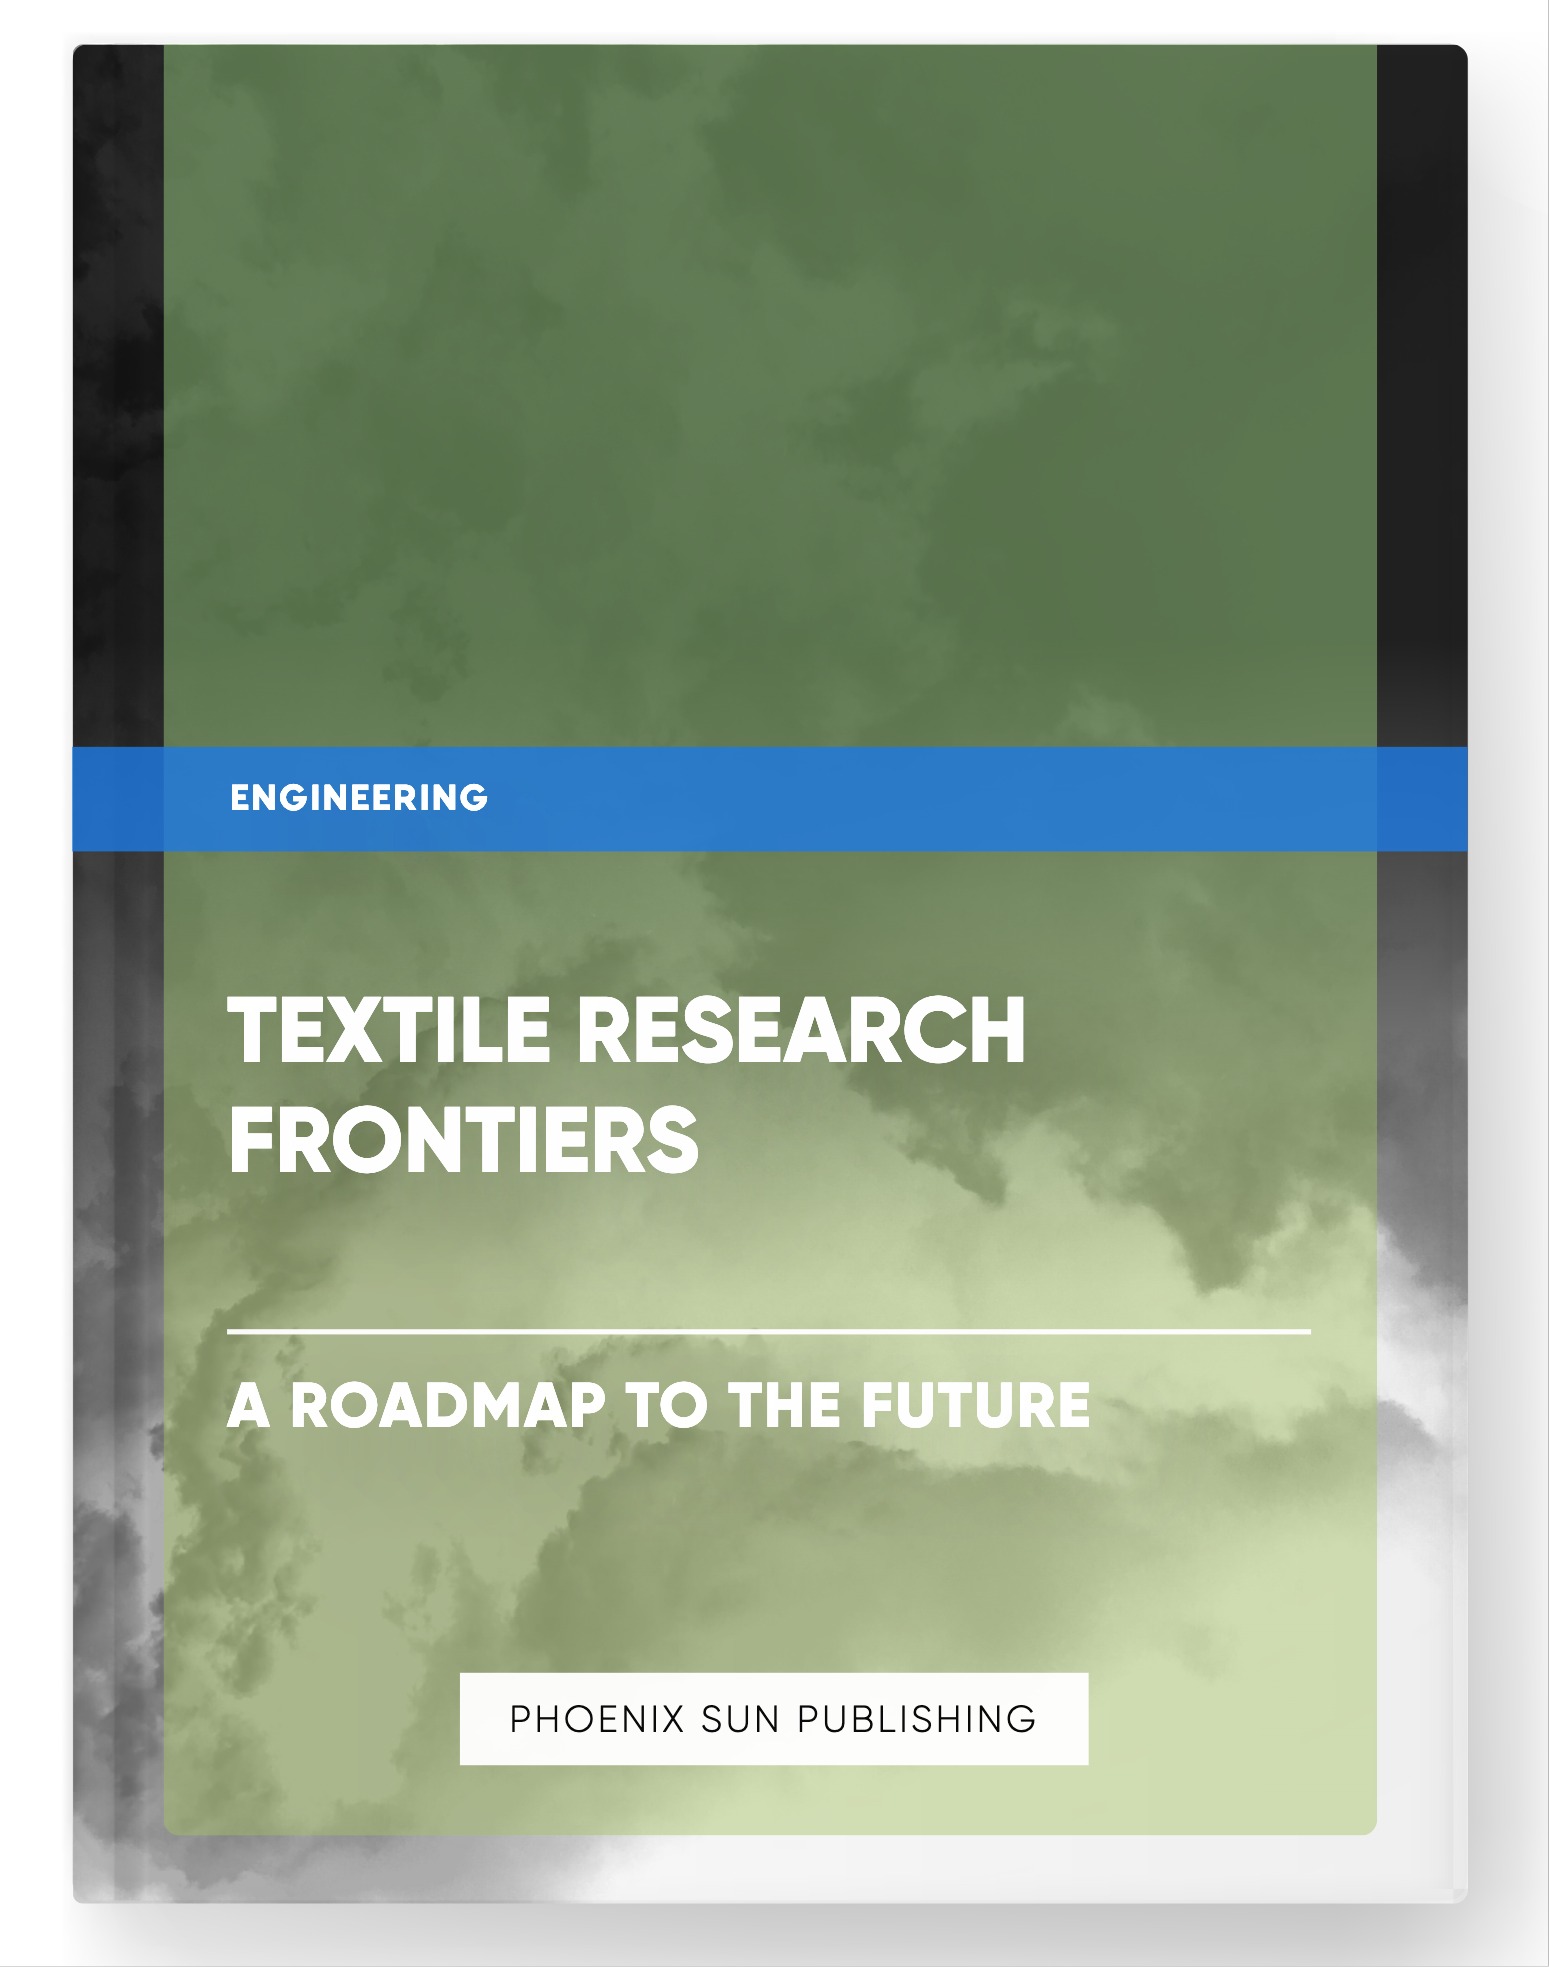 Textile Research Frontiers – A Roadmap to the Future